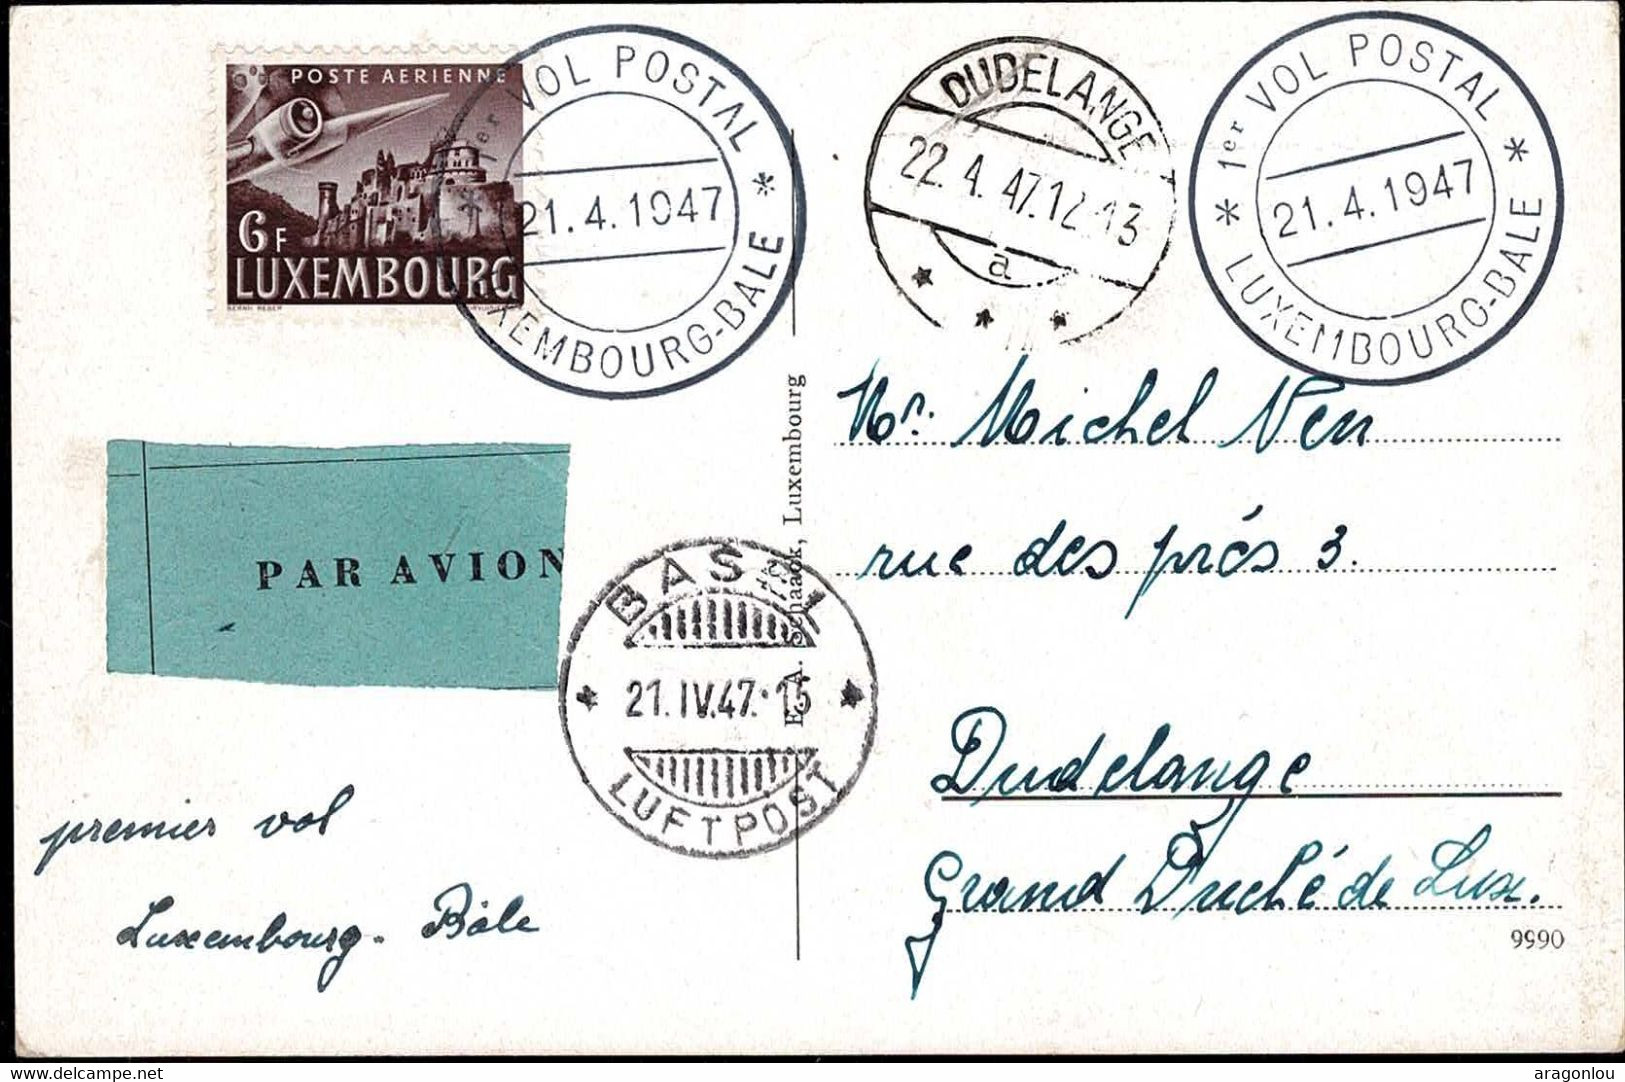 Luxembourg, Luxemburg 1947 Carte 1er Vol Postal Luxembourg-Bâle, 2 Scans - Lettres & Documents